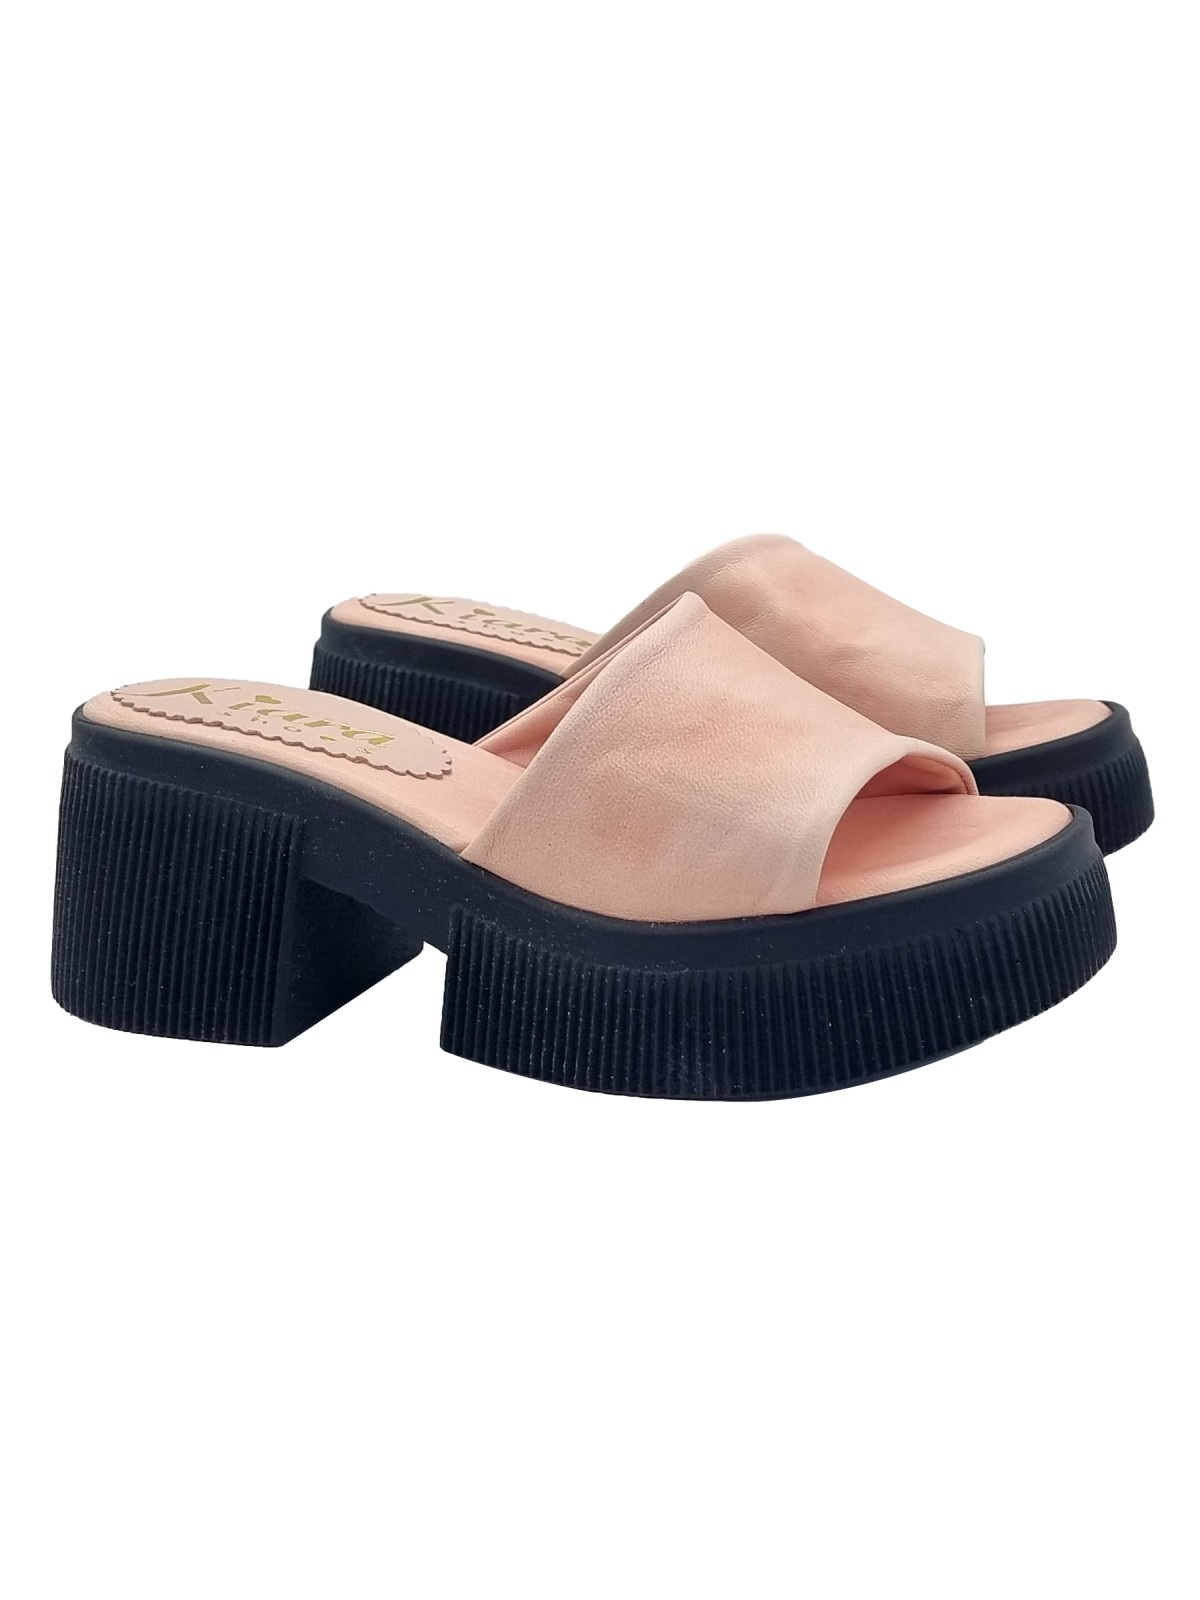 WOMEN'S CLOGS IN PINK LEATHER WITH 7 CM HEEL